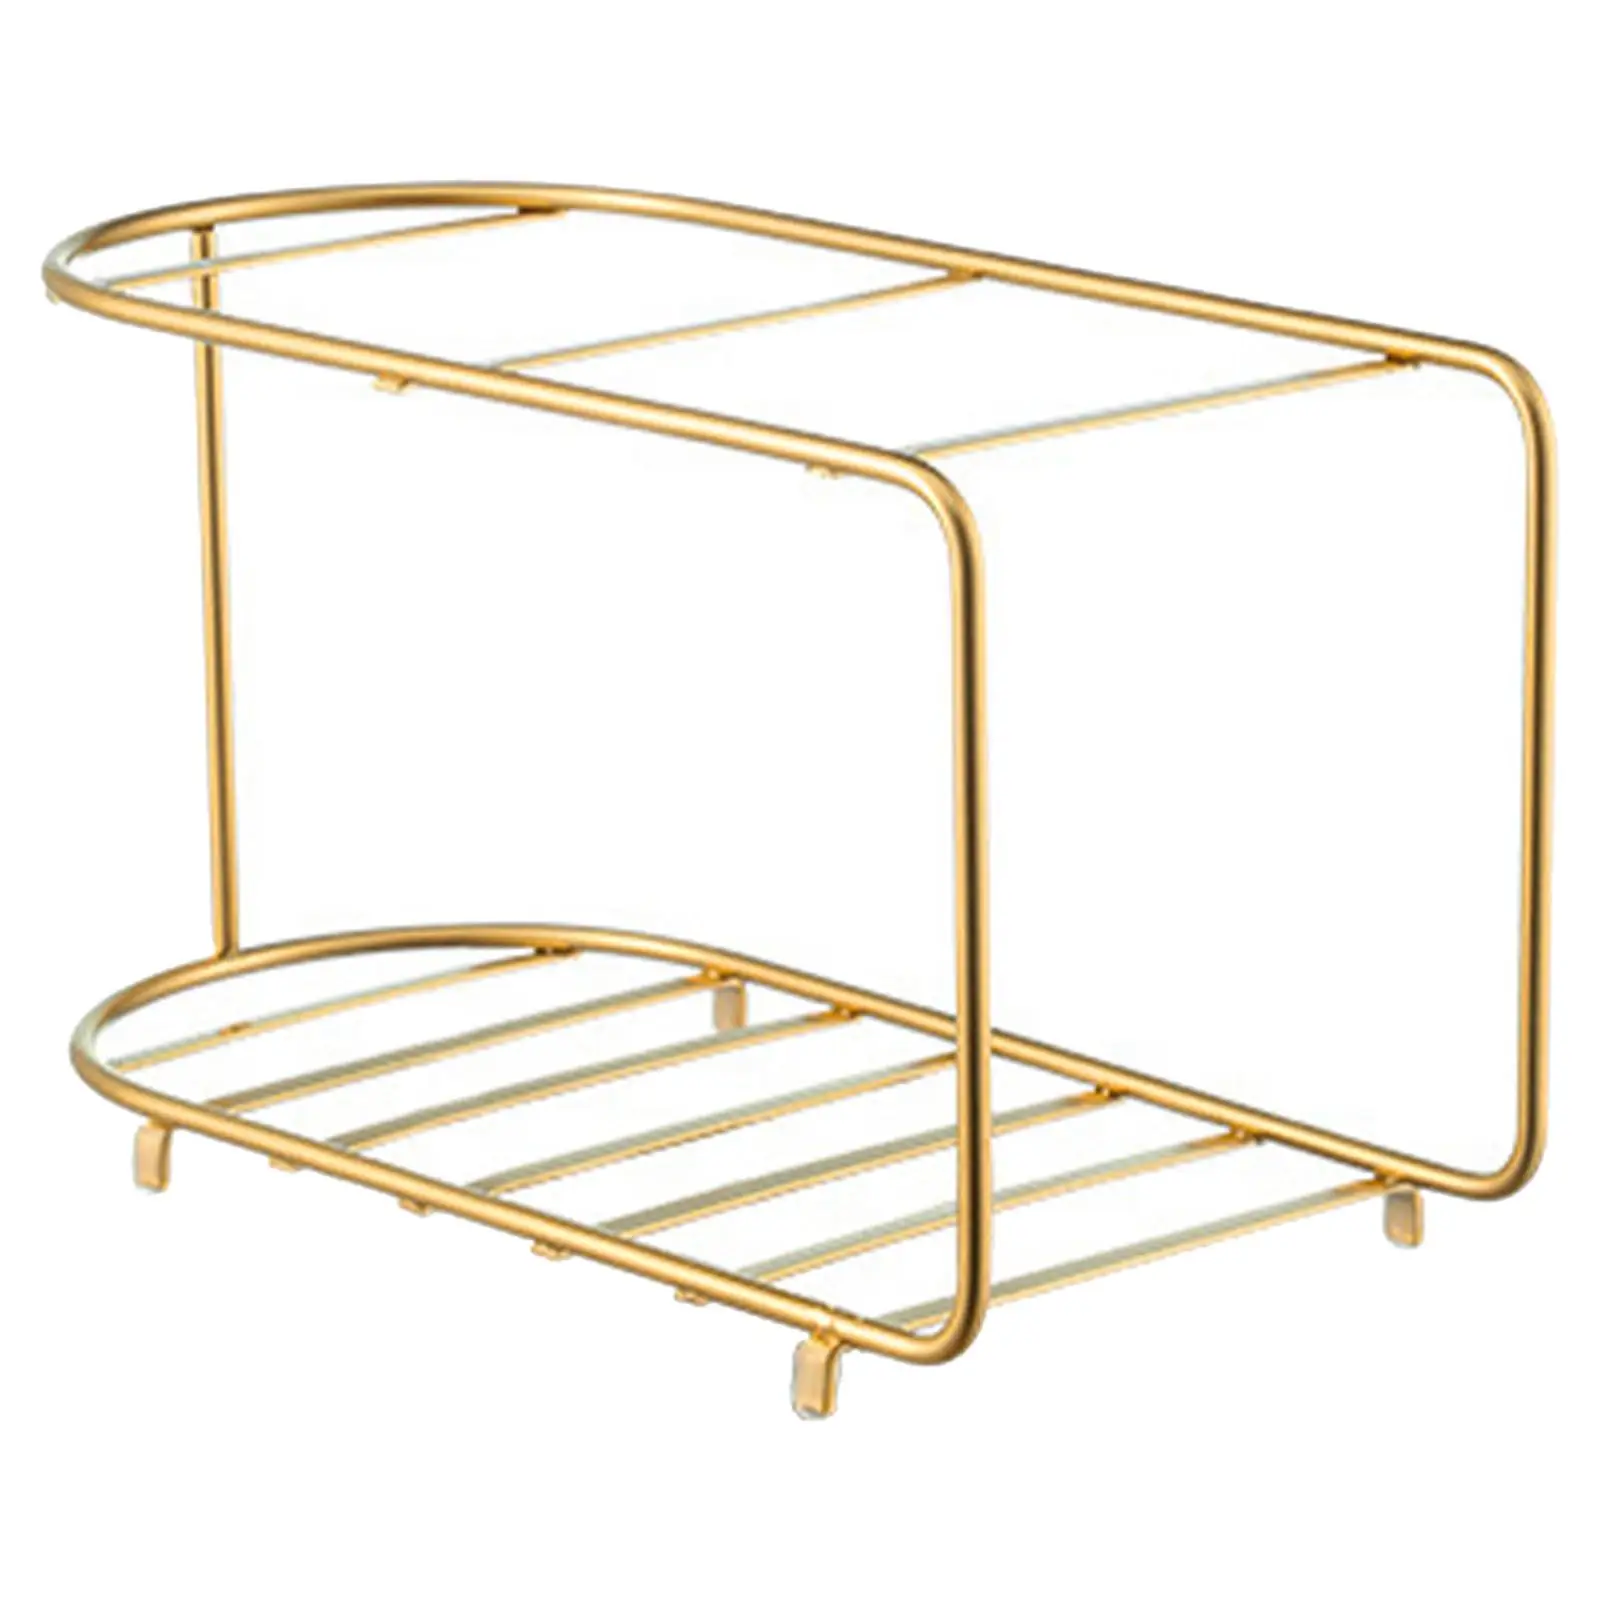 Double Layer Drink Dispenser Stand Basket Metal Stand Holder Rack Nordic Style